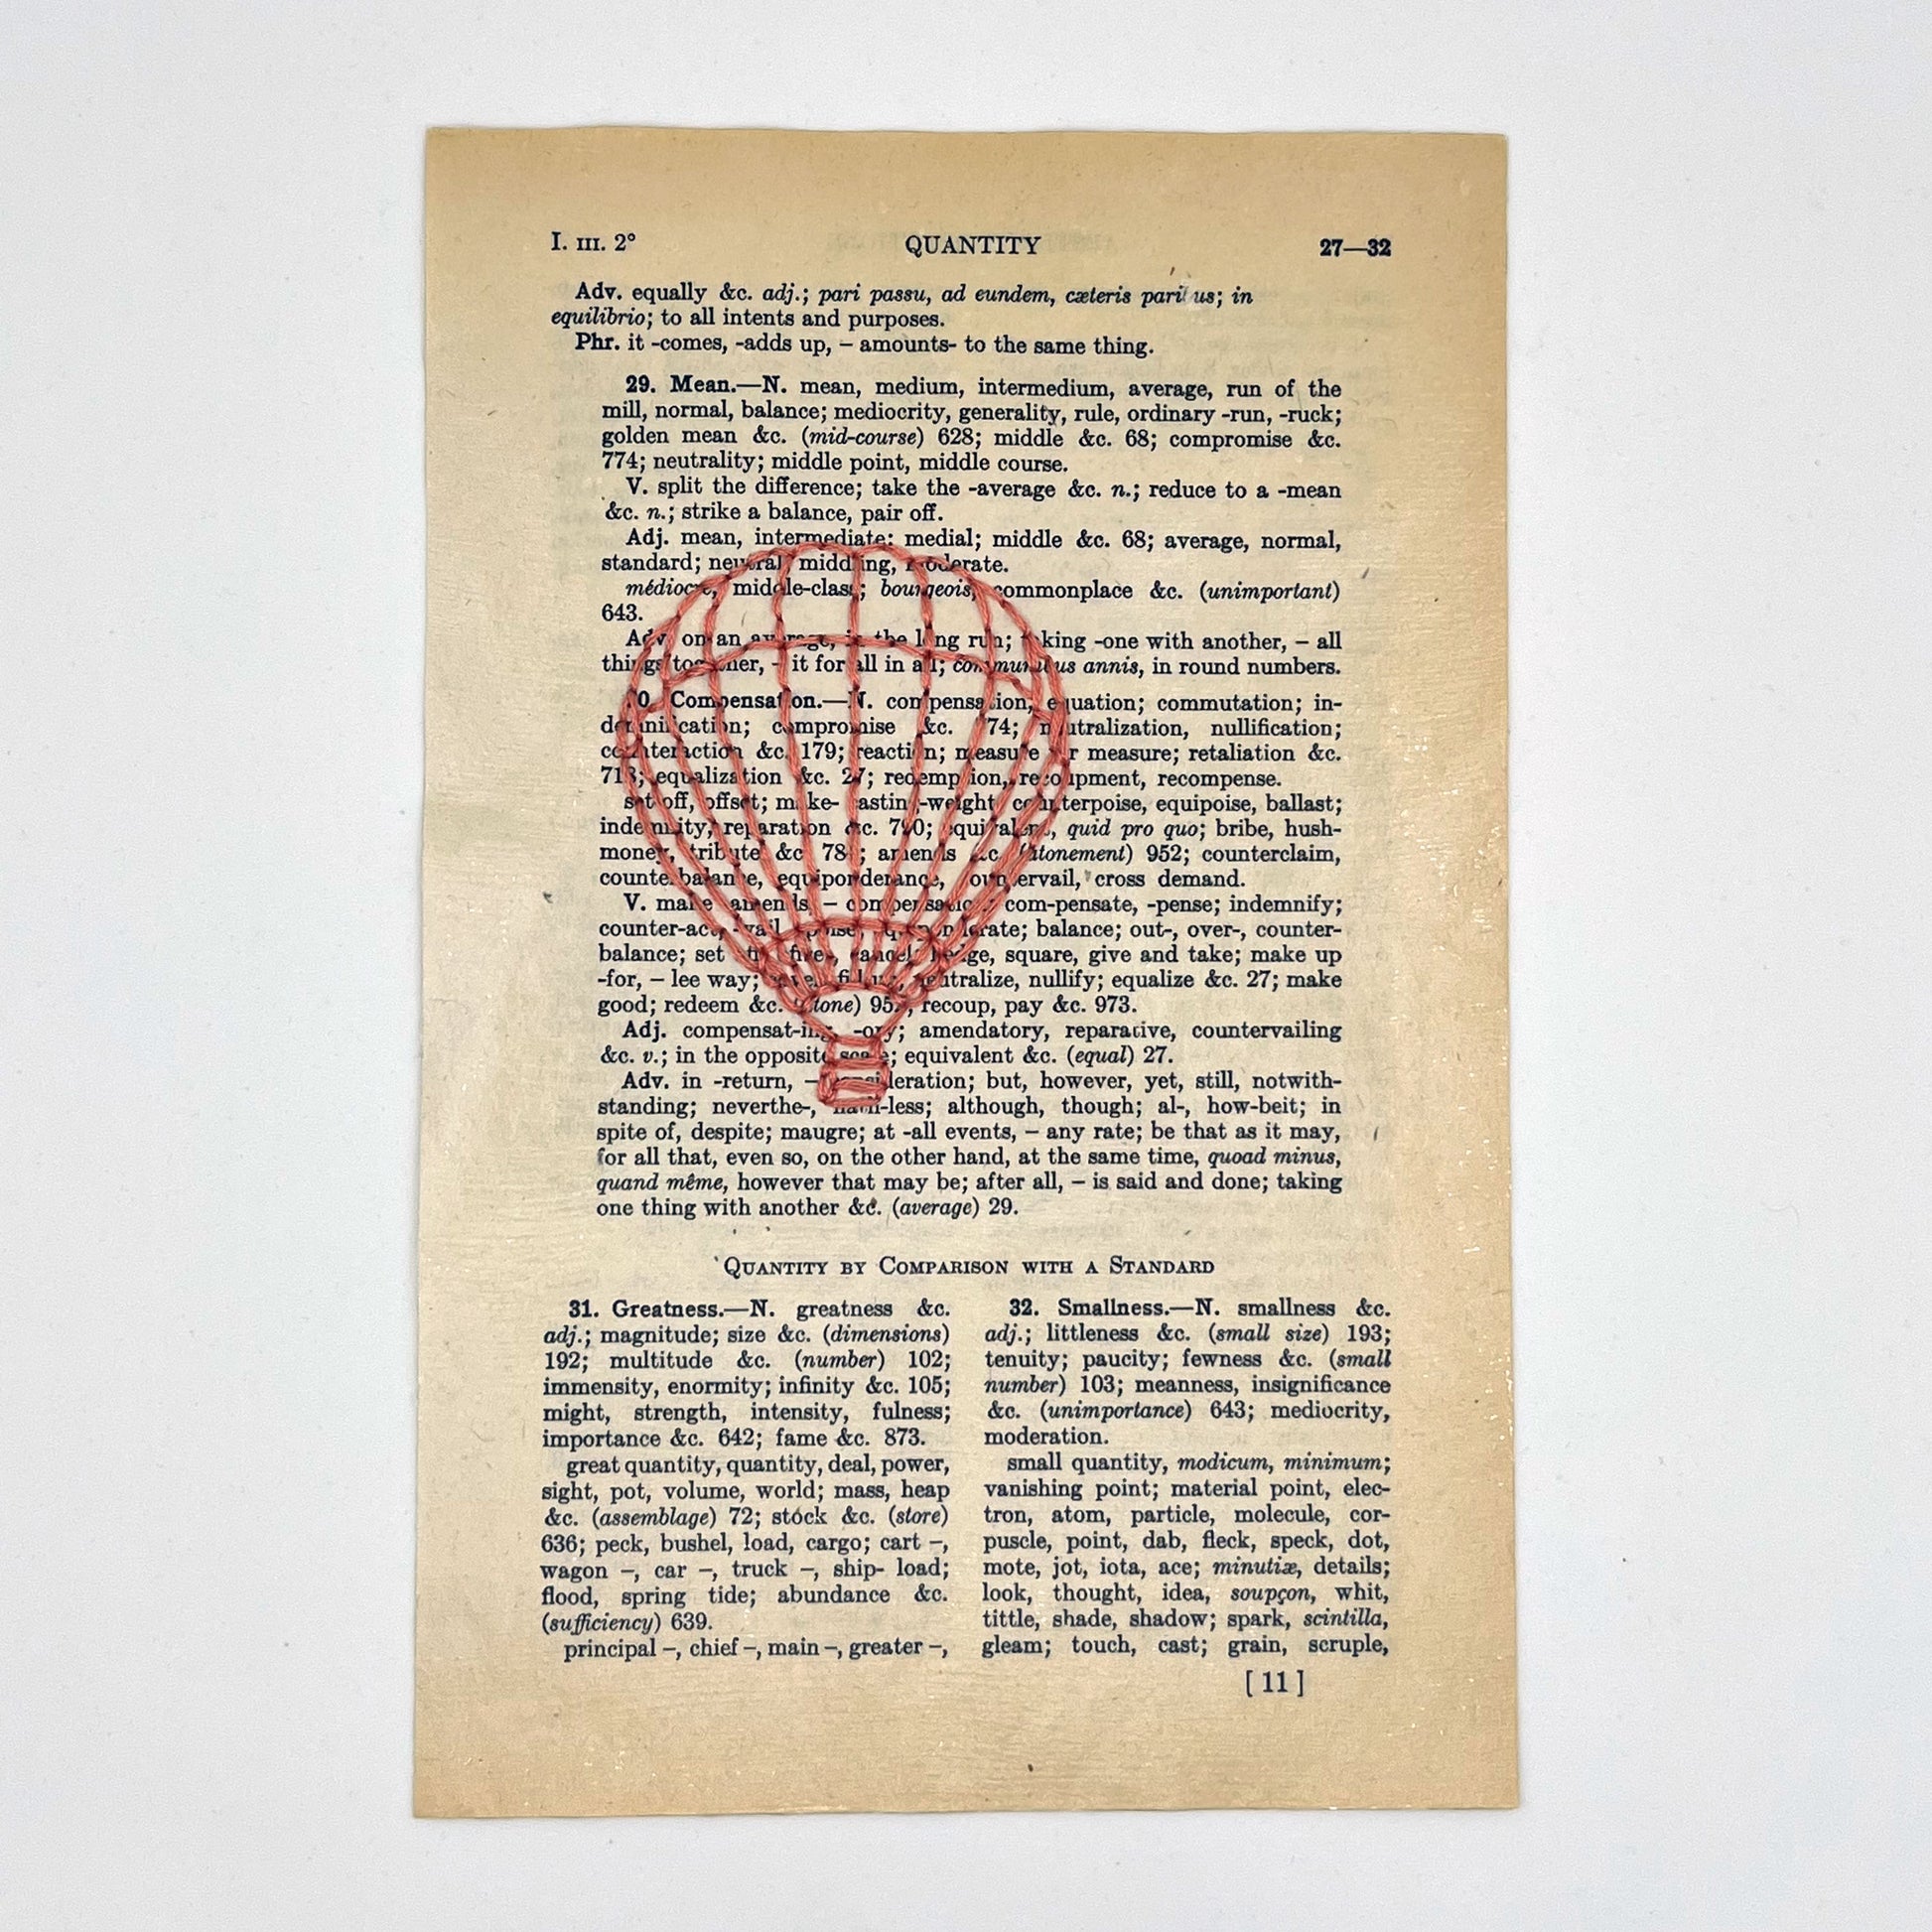 a vintage thesaurus page, hand stitched over with an outline of a hot air balloon in coral thread on a white background